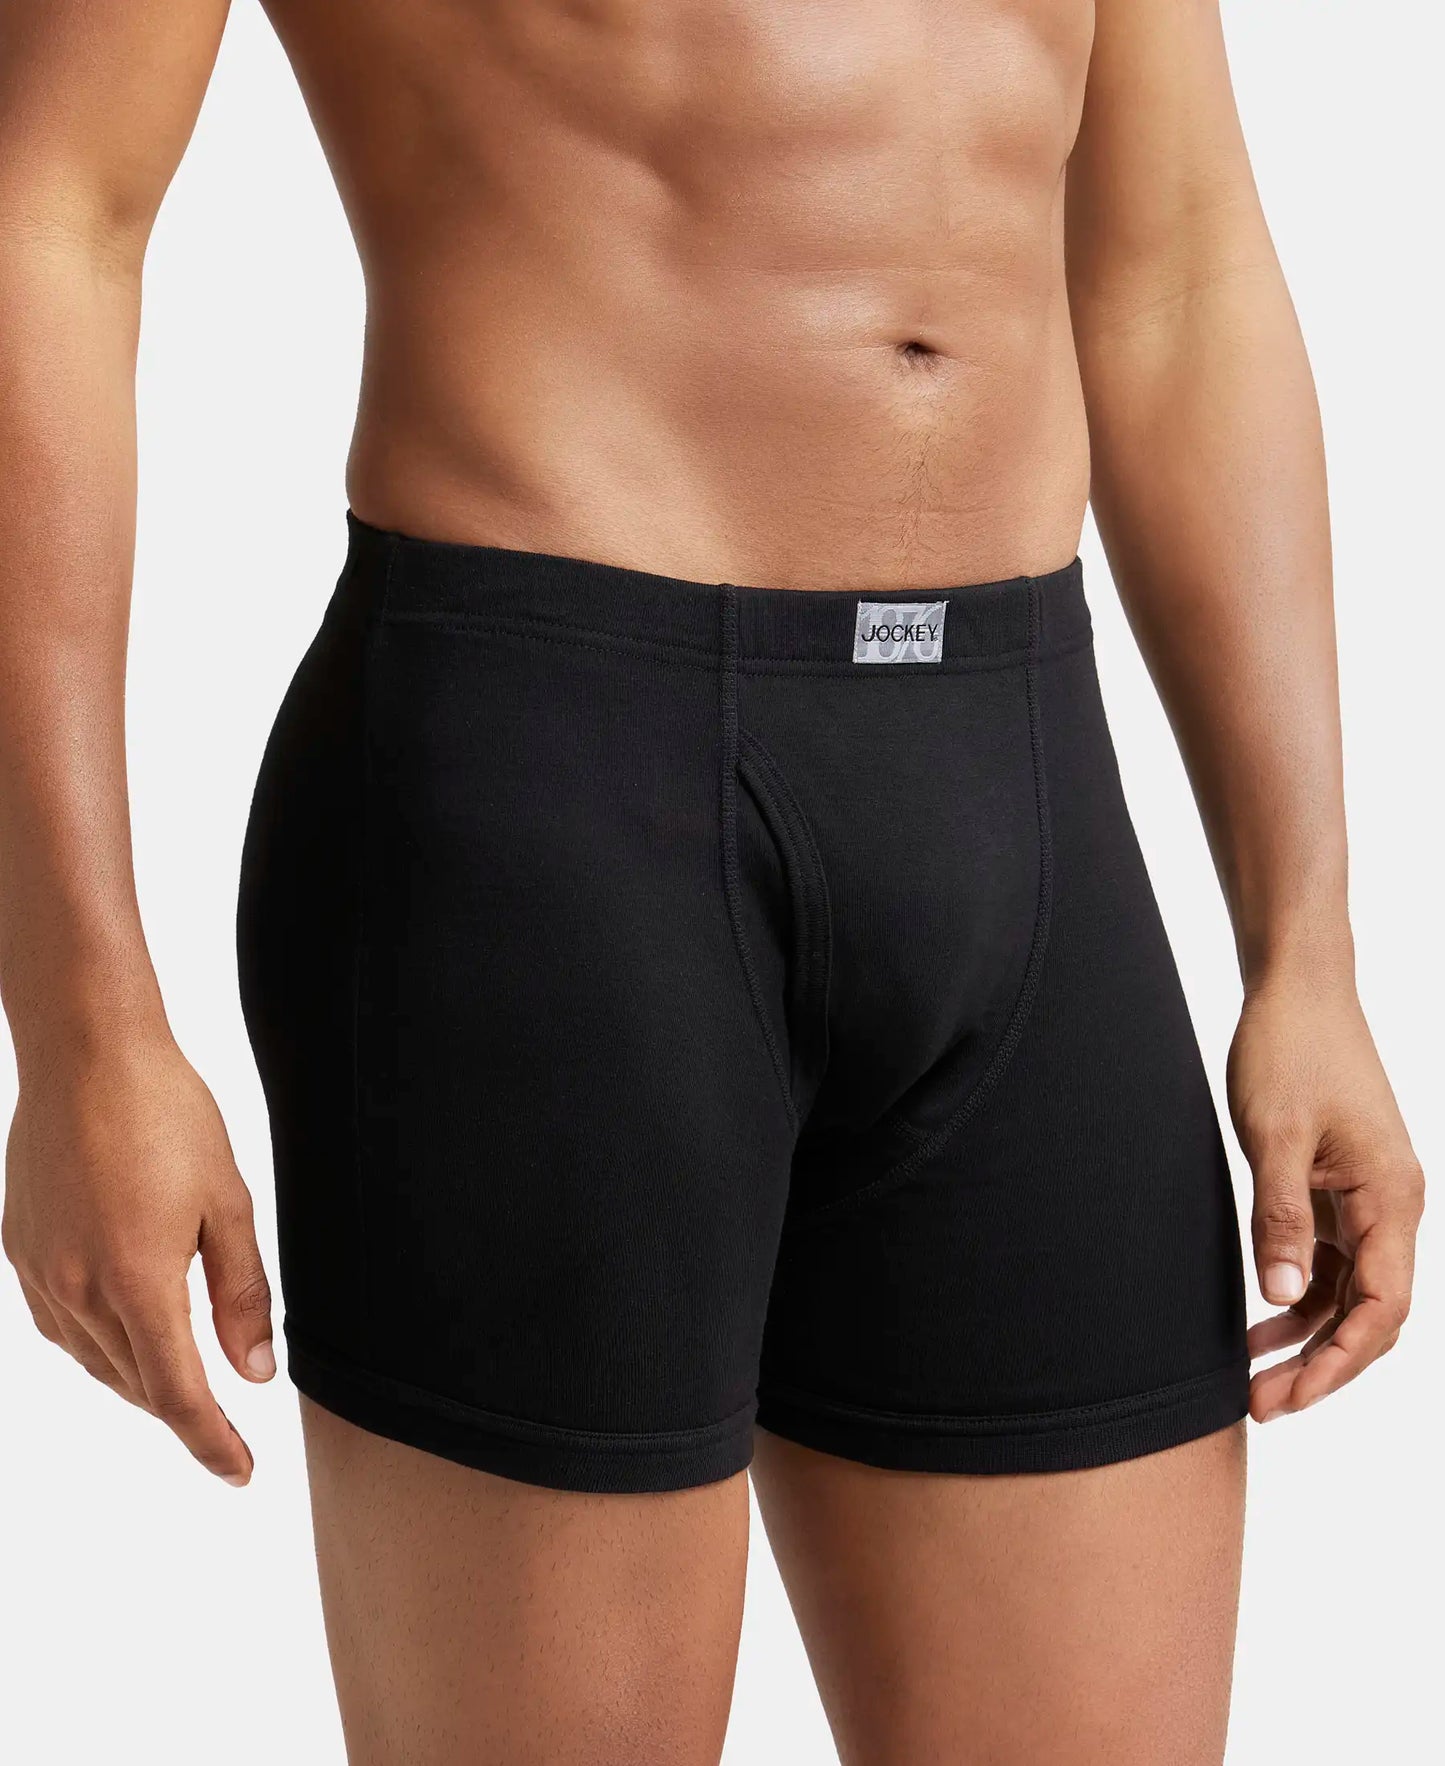 Super Combed Cotton Rib Solid Boxer Brief with Ultrasoft and Durable Waistband - Black/Navy/Charcoal Melange (Pack of 3)-3